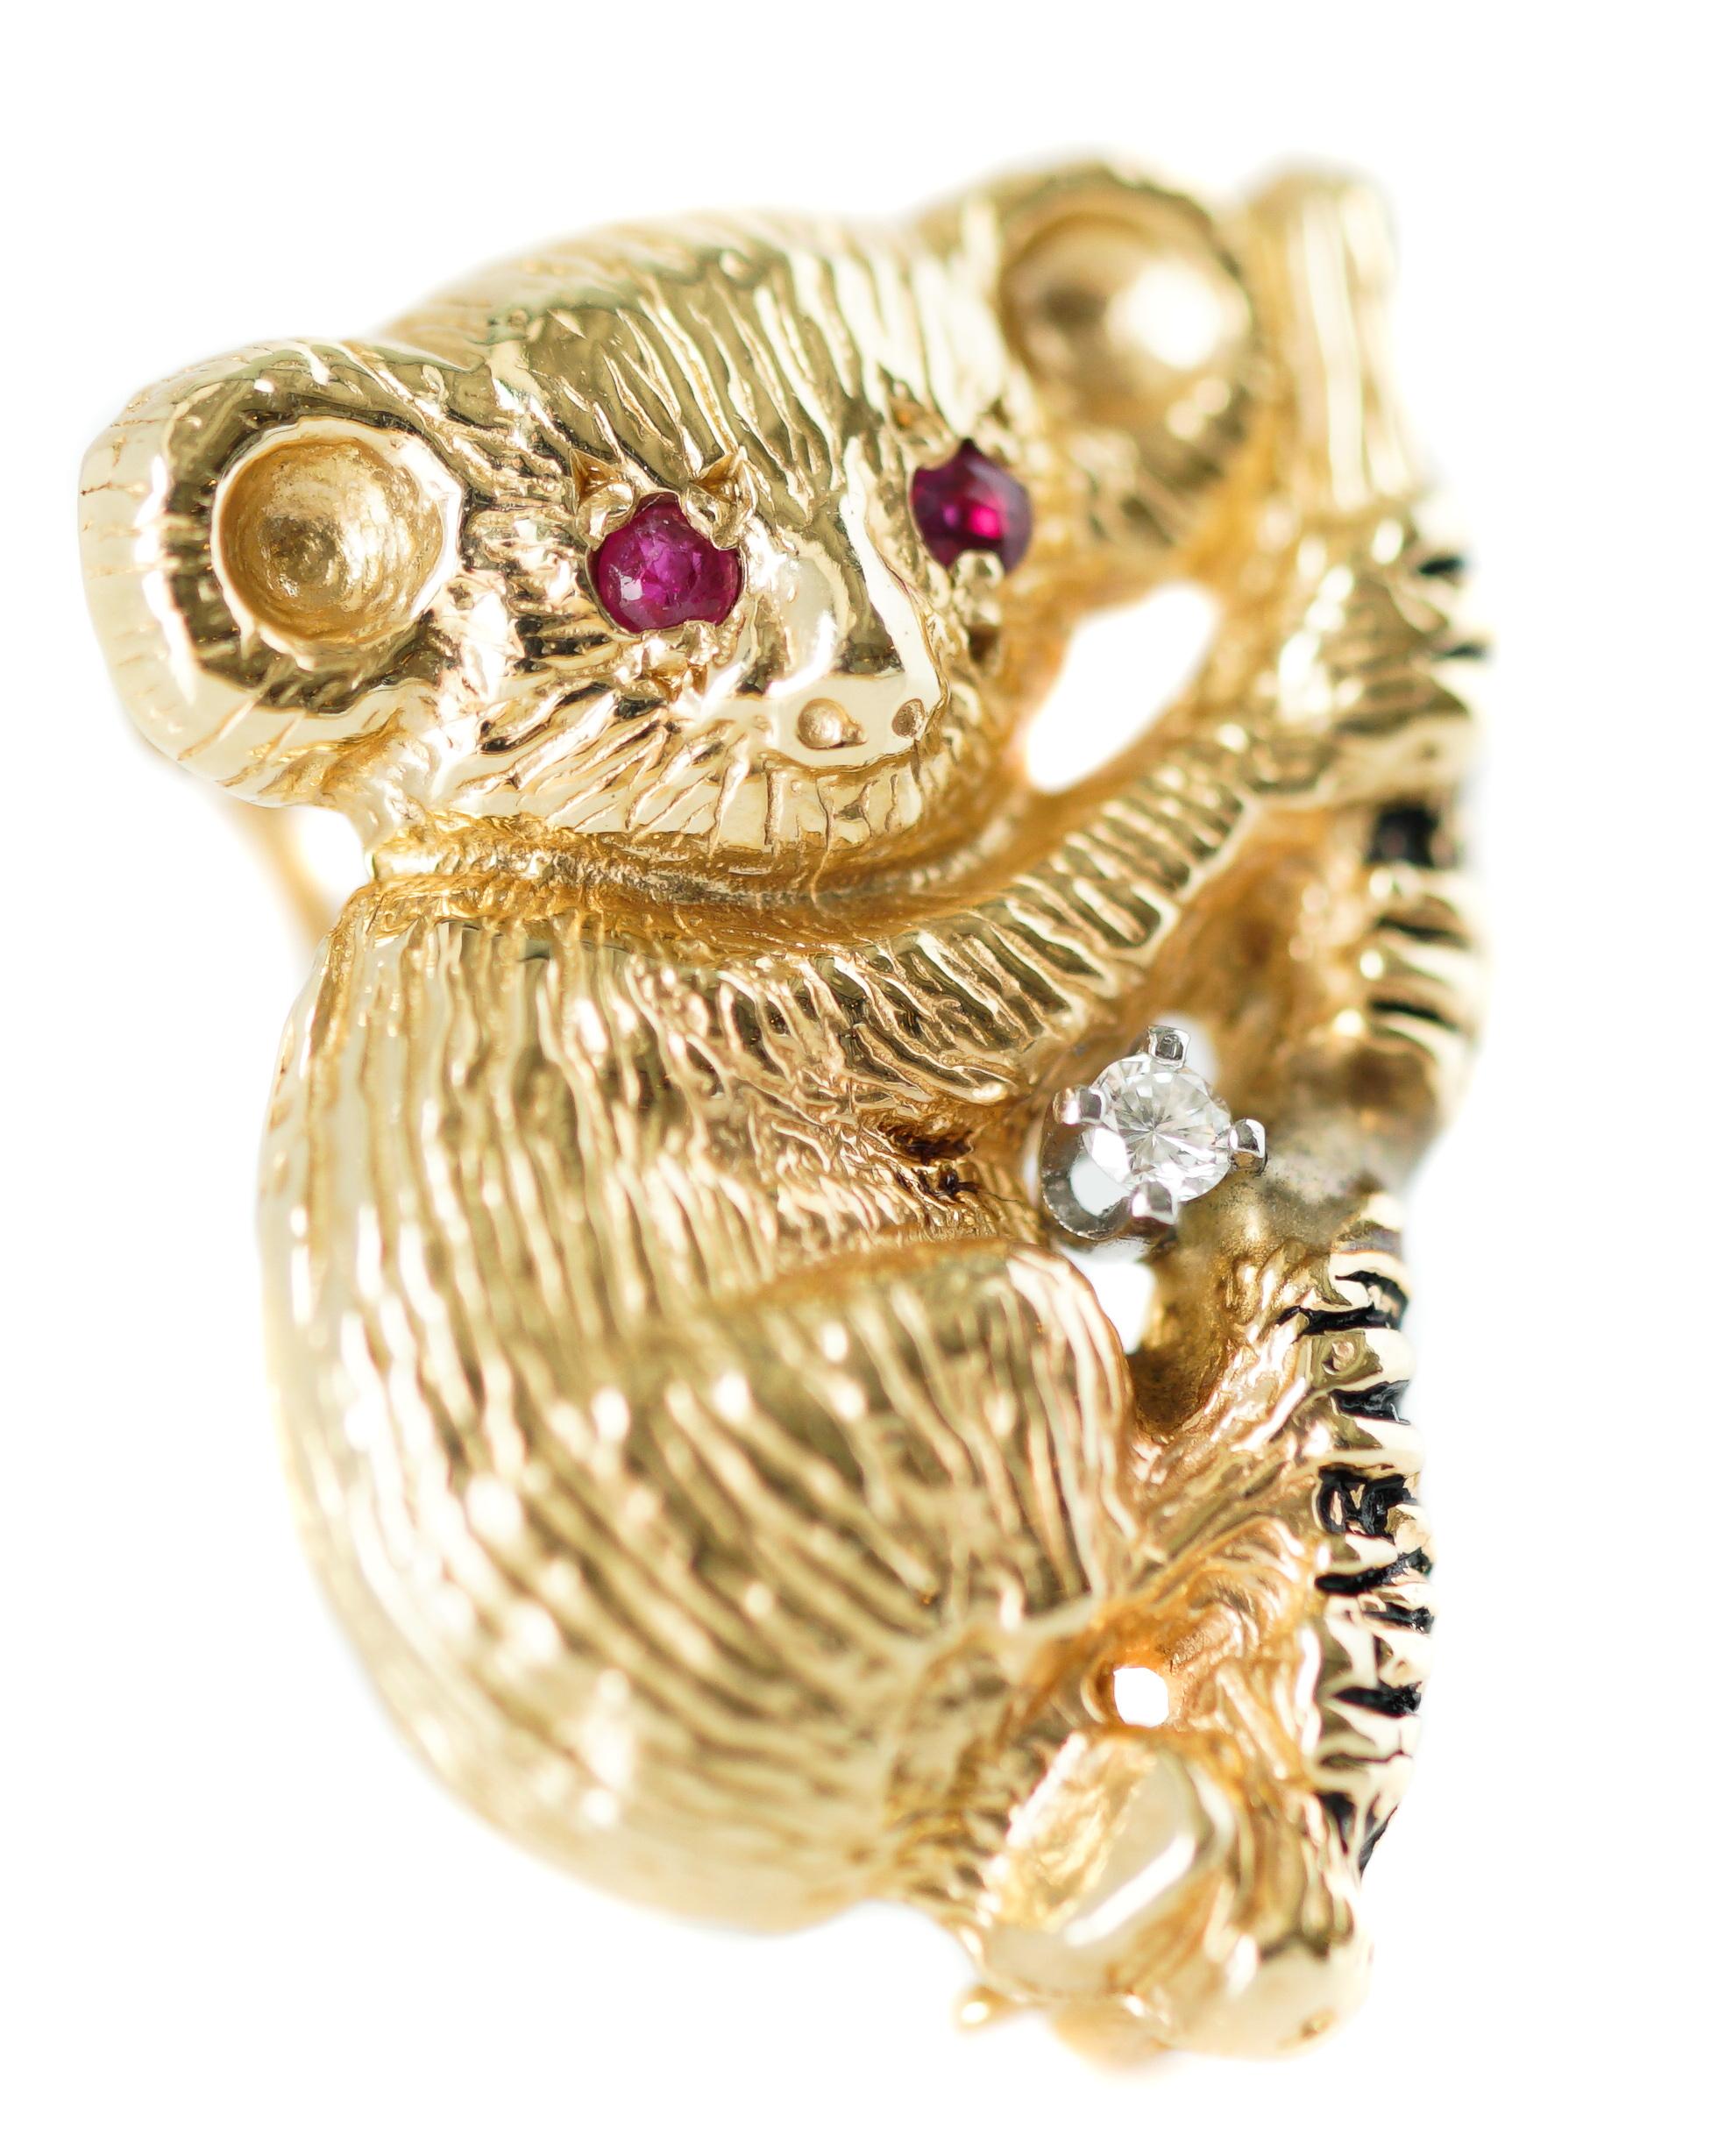 Gold Koala Pin - 14 karat Yellow Gold, Rubies, Diamond

Features:
Adorable Koala Bear hugging a Eucalyptus Tree Branch
Finely Detailed Furry Texture on Round Head and Body
Fine Feature details include Big Furry Ears, Soft Nose, Tiny Mouth, Tiny Paws